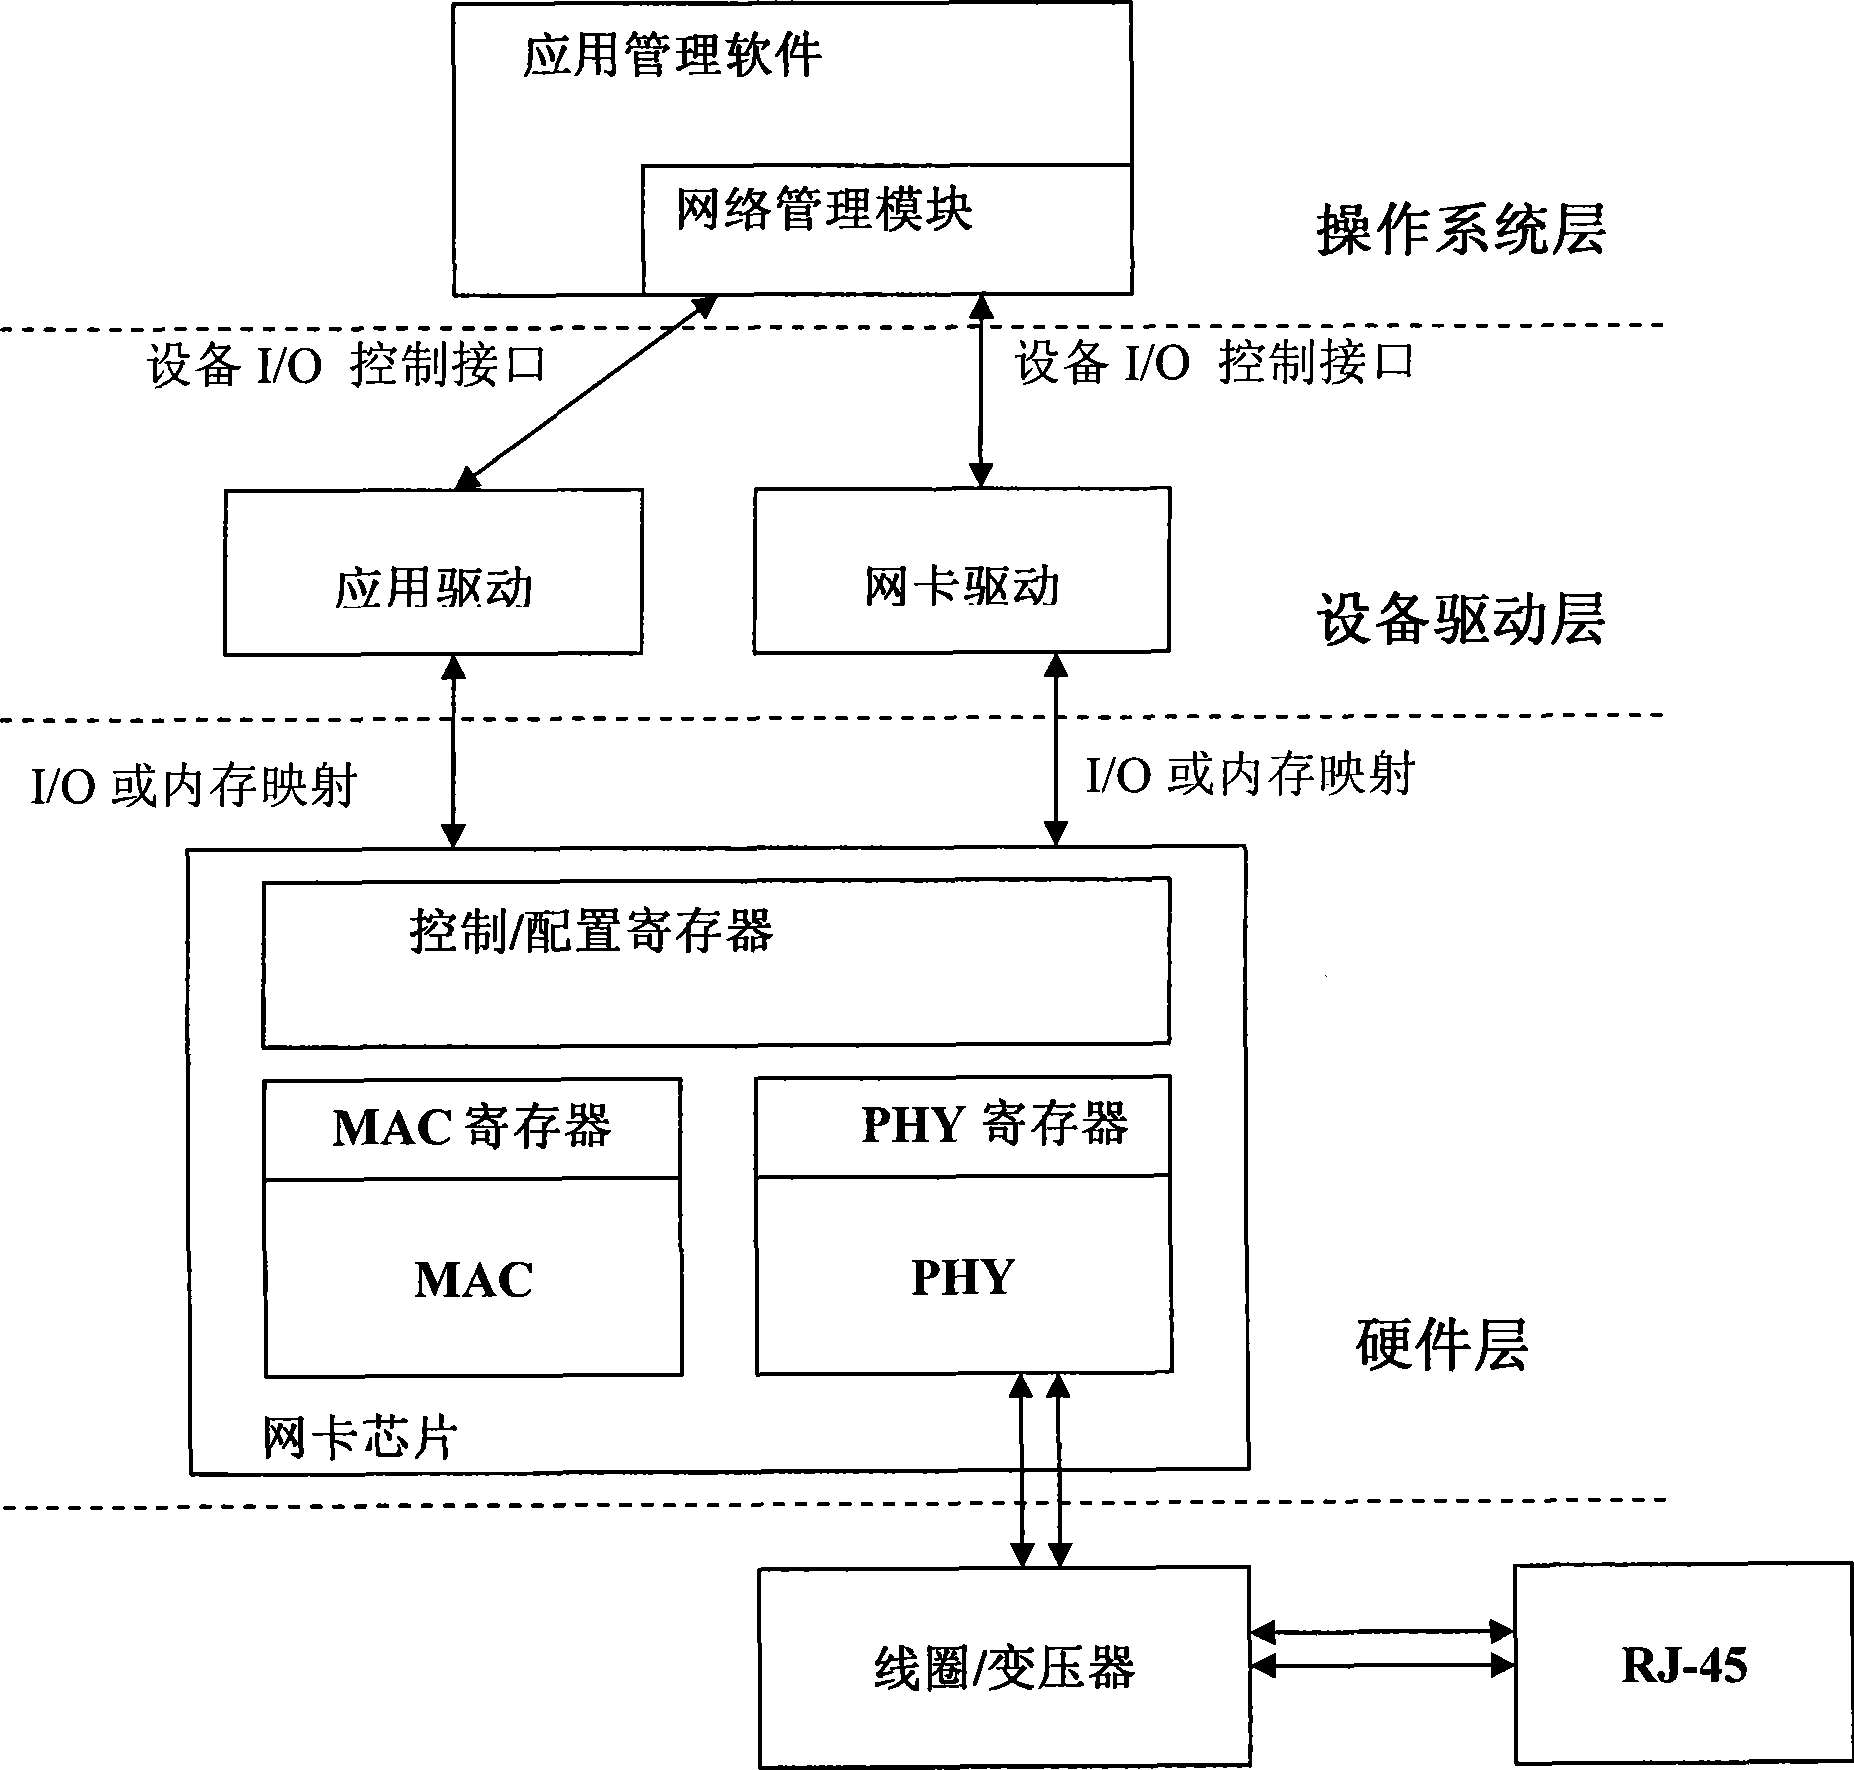 Dynamic control method and device for network card power consumption and connection mode